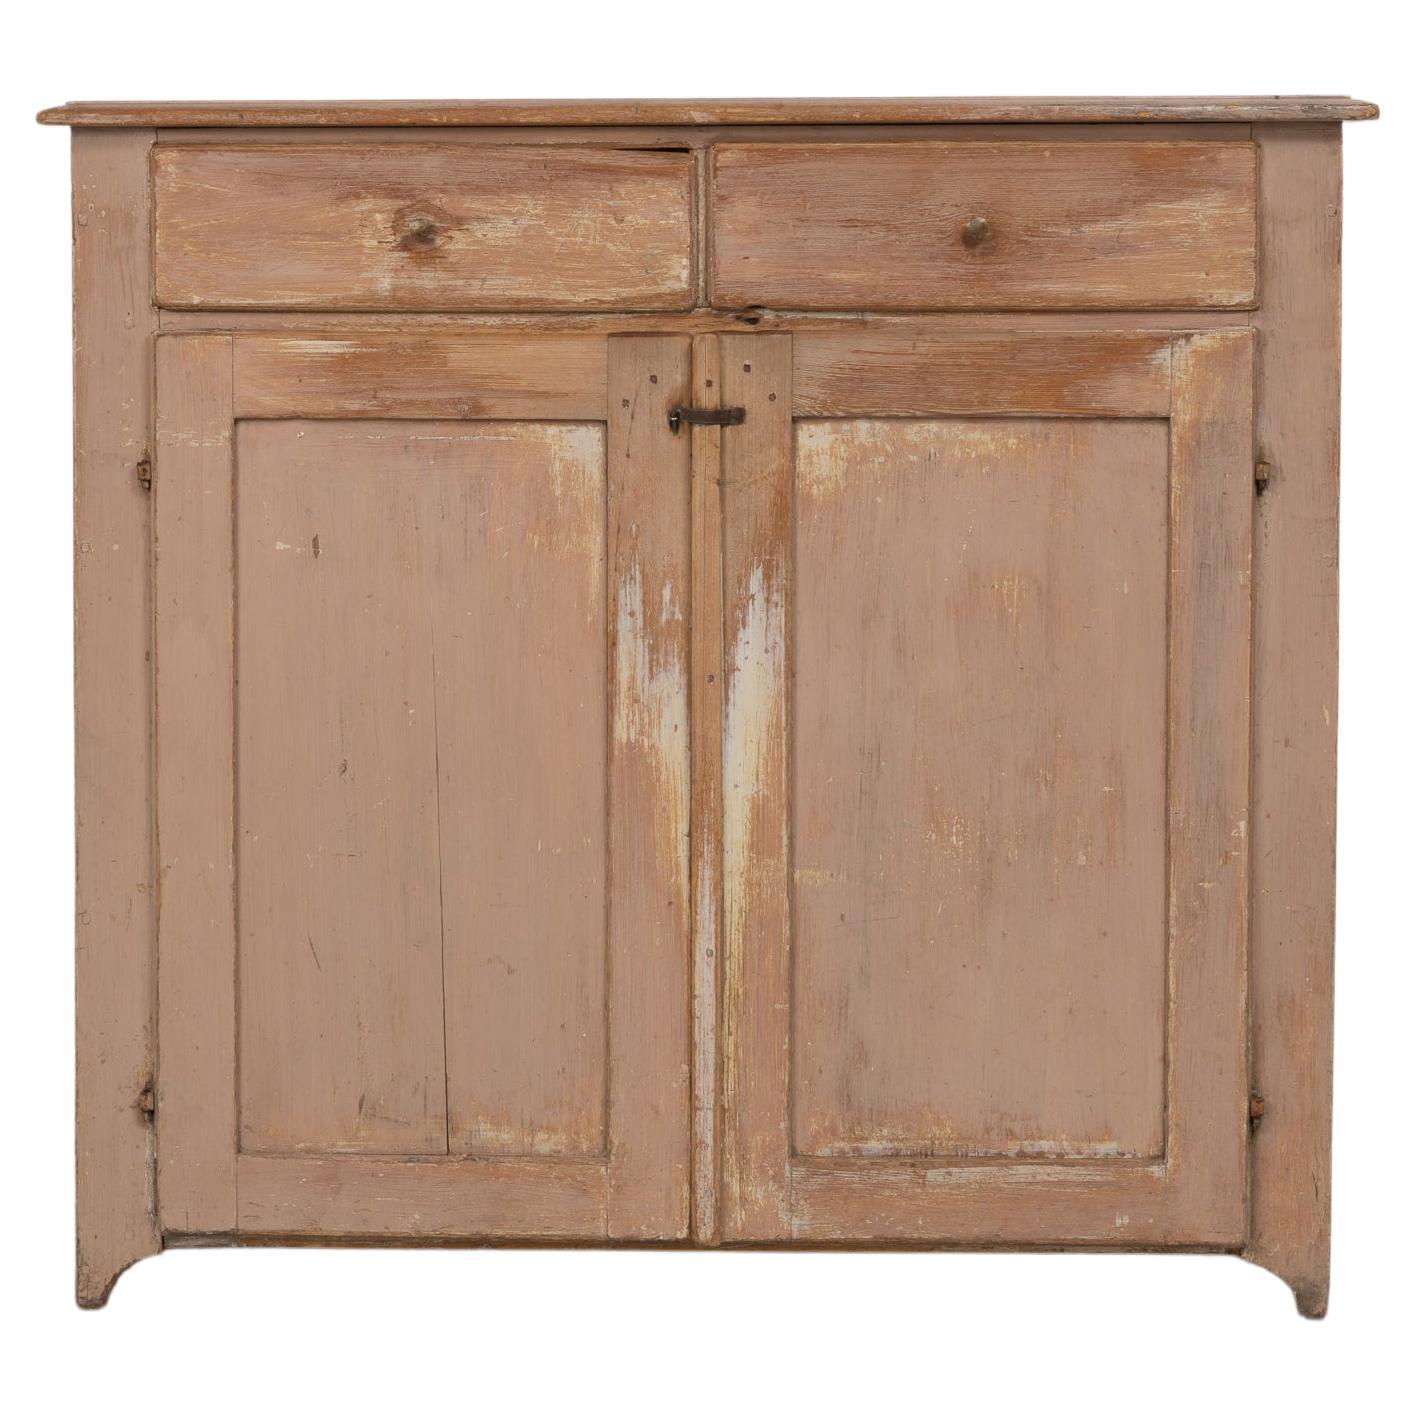 Mid 19th Century Swedish Country Home Sideboard For Sale